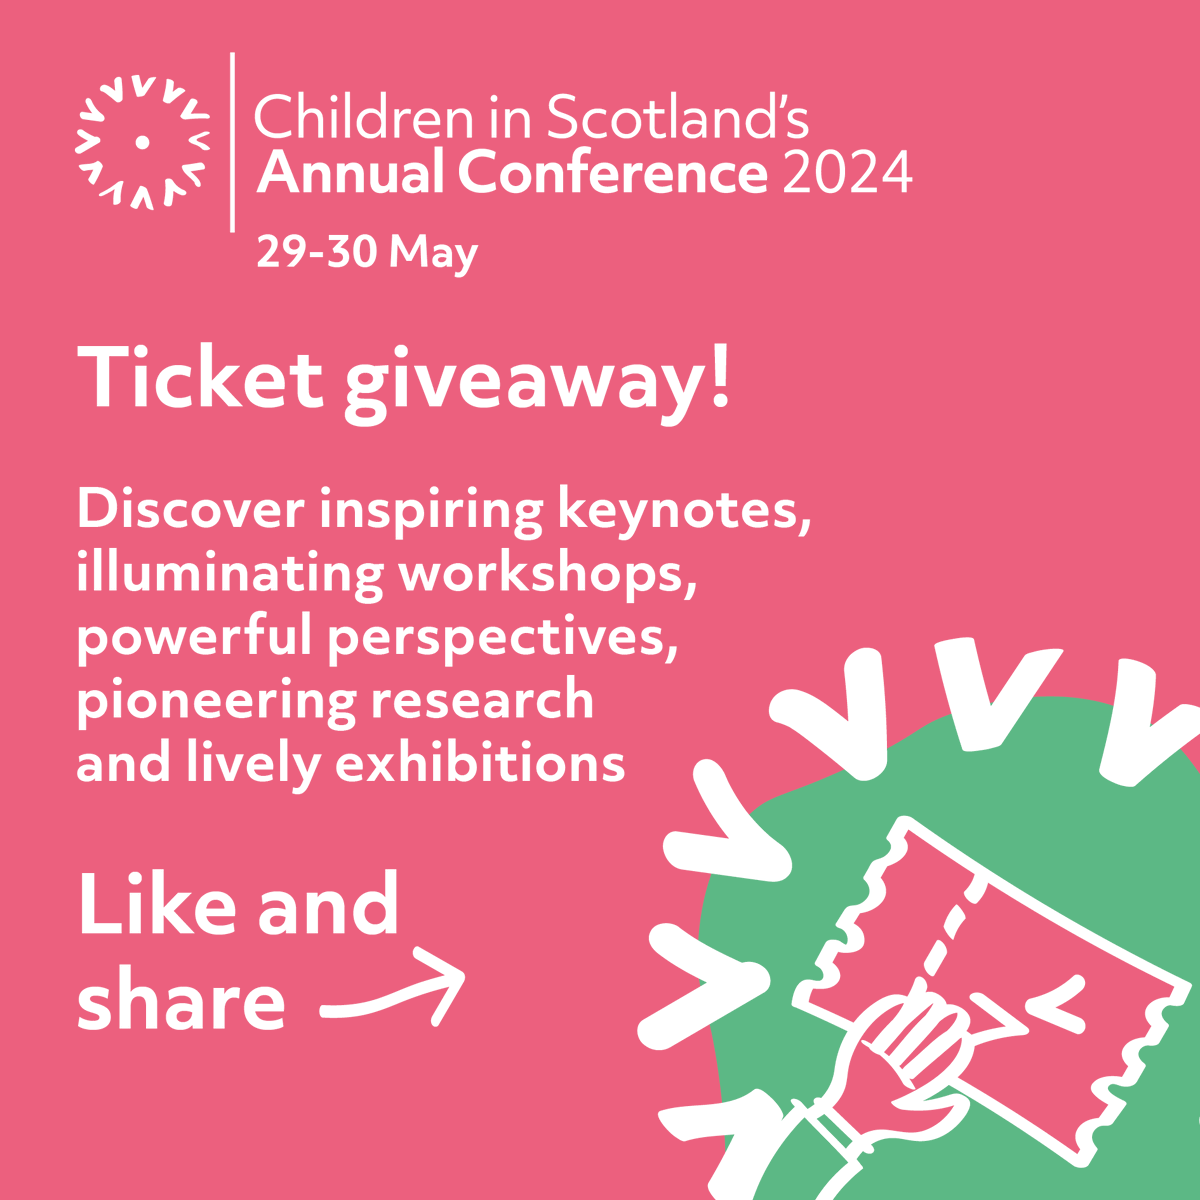 💫Ticket giveaway time 💫 We have one free day ticket to #CiSAC24 to give away before the end of the day! To be in with a chance to win, just Like ❤️ and Repost ↩️ this post. Find out more about the conference: childreninscotland.org.uk/cisac24